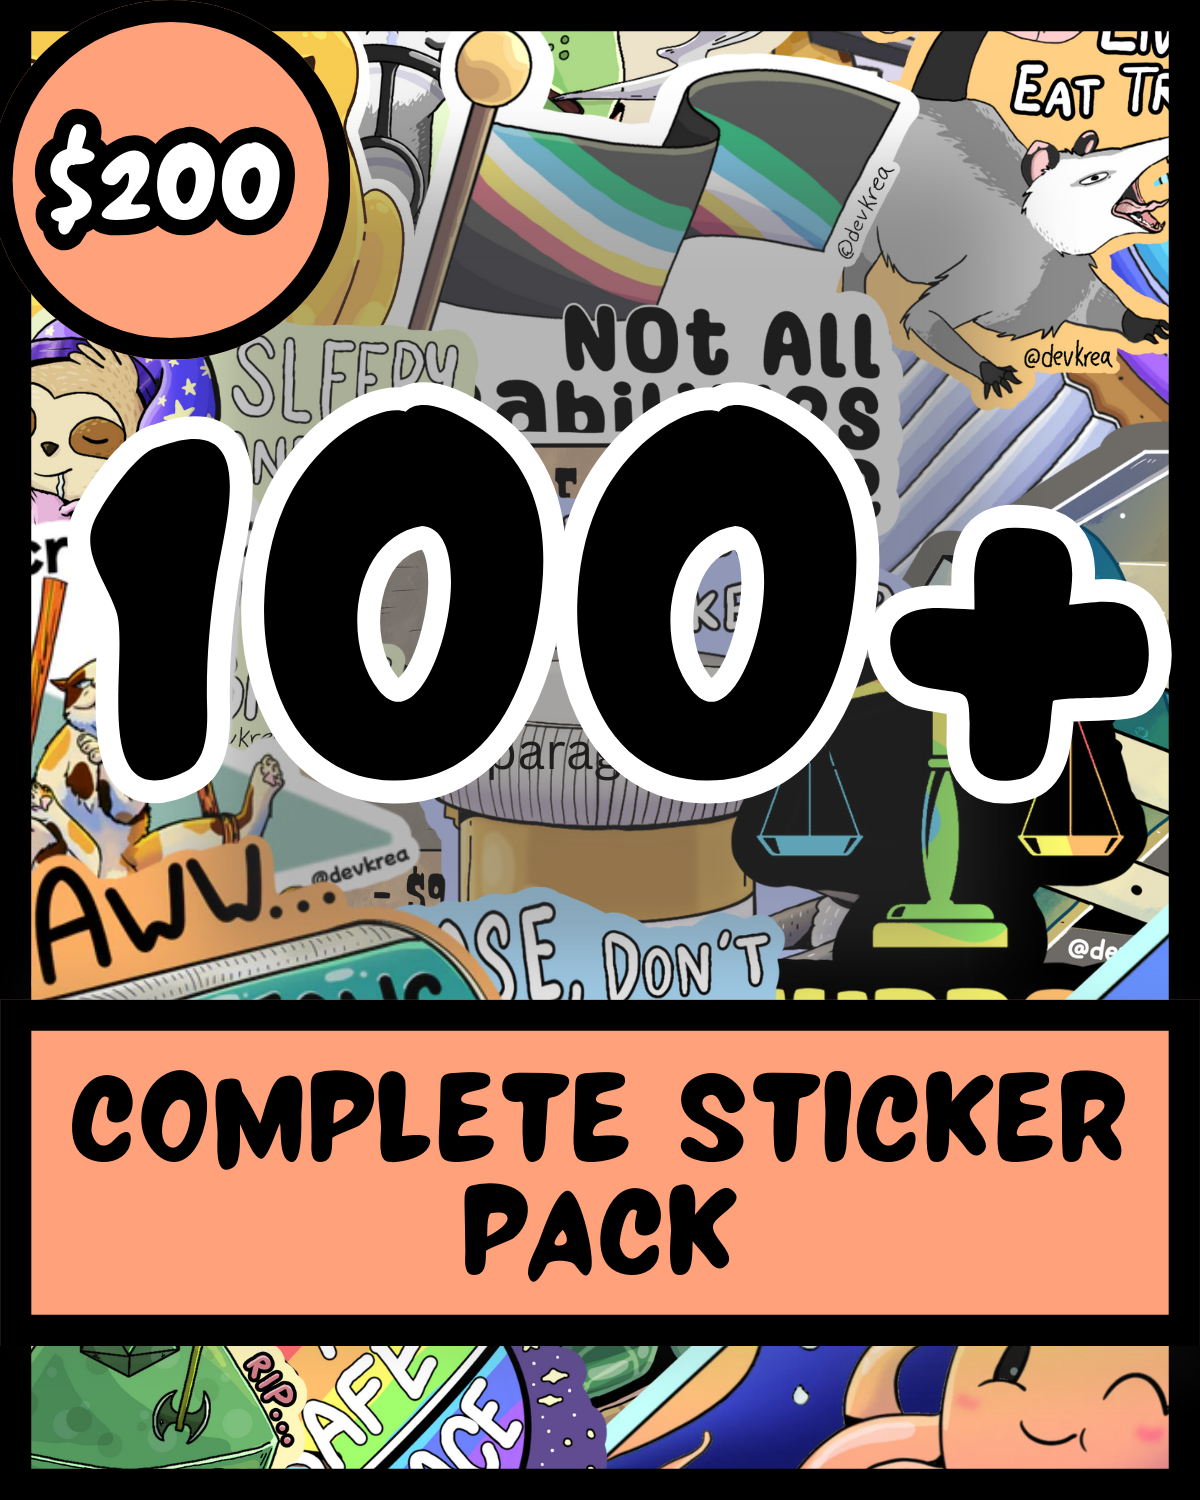 Complete Sticker Pack | 100+ Stickers | Deviant Kreations - Deviantkreations